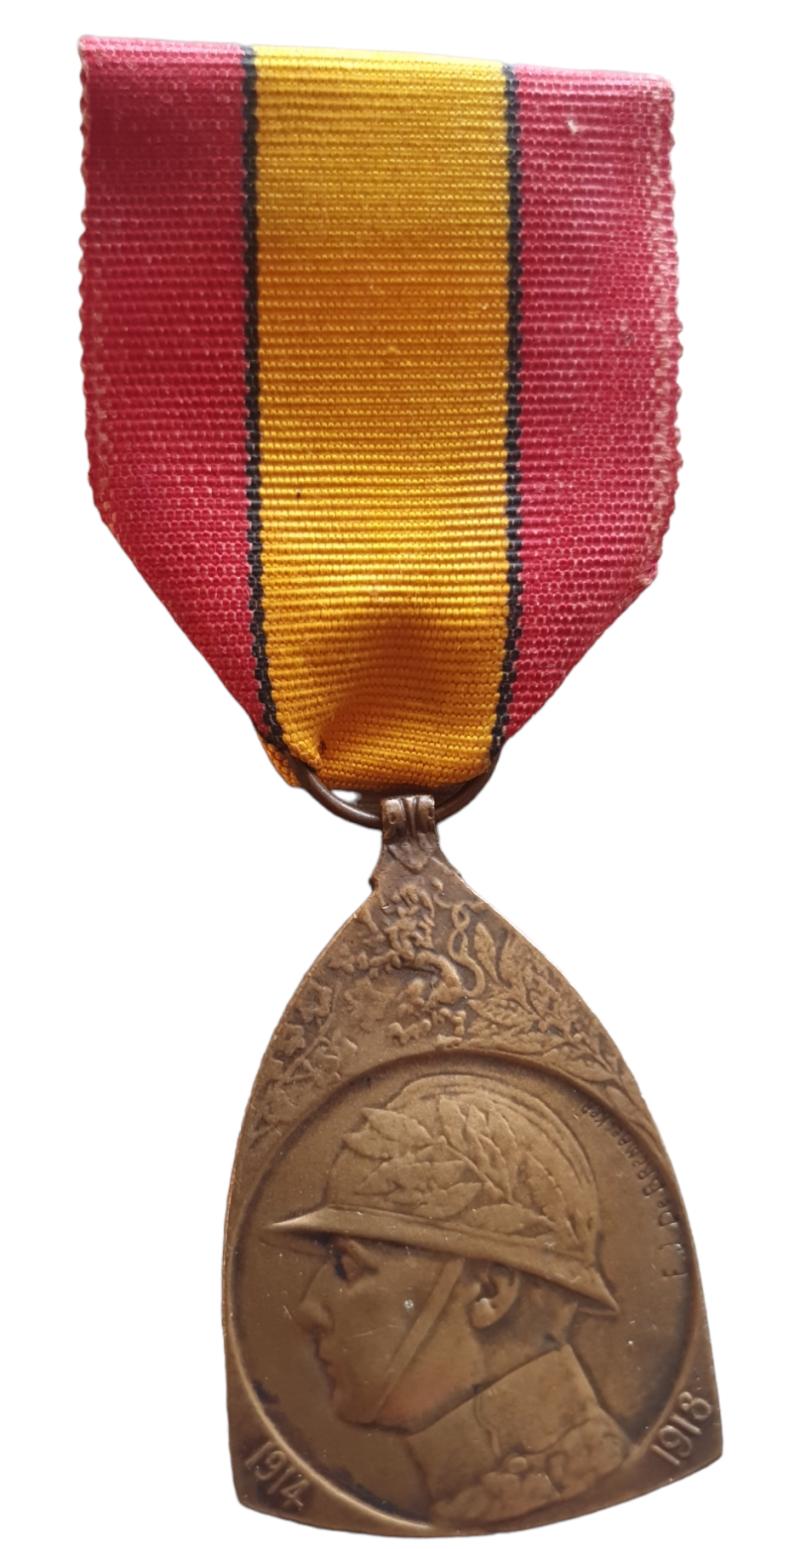 A Belgian Commemorative Medal of the 1914–1918 War